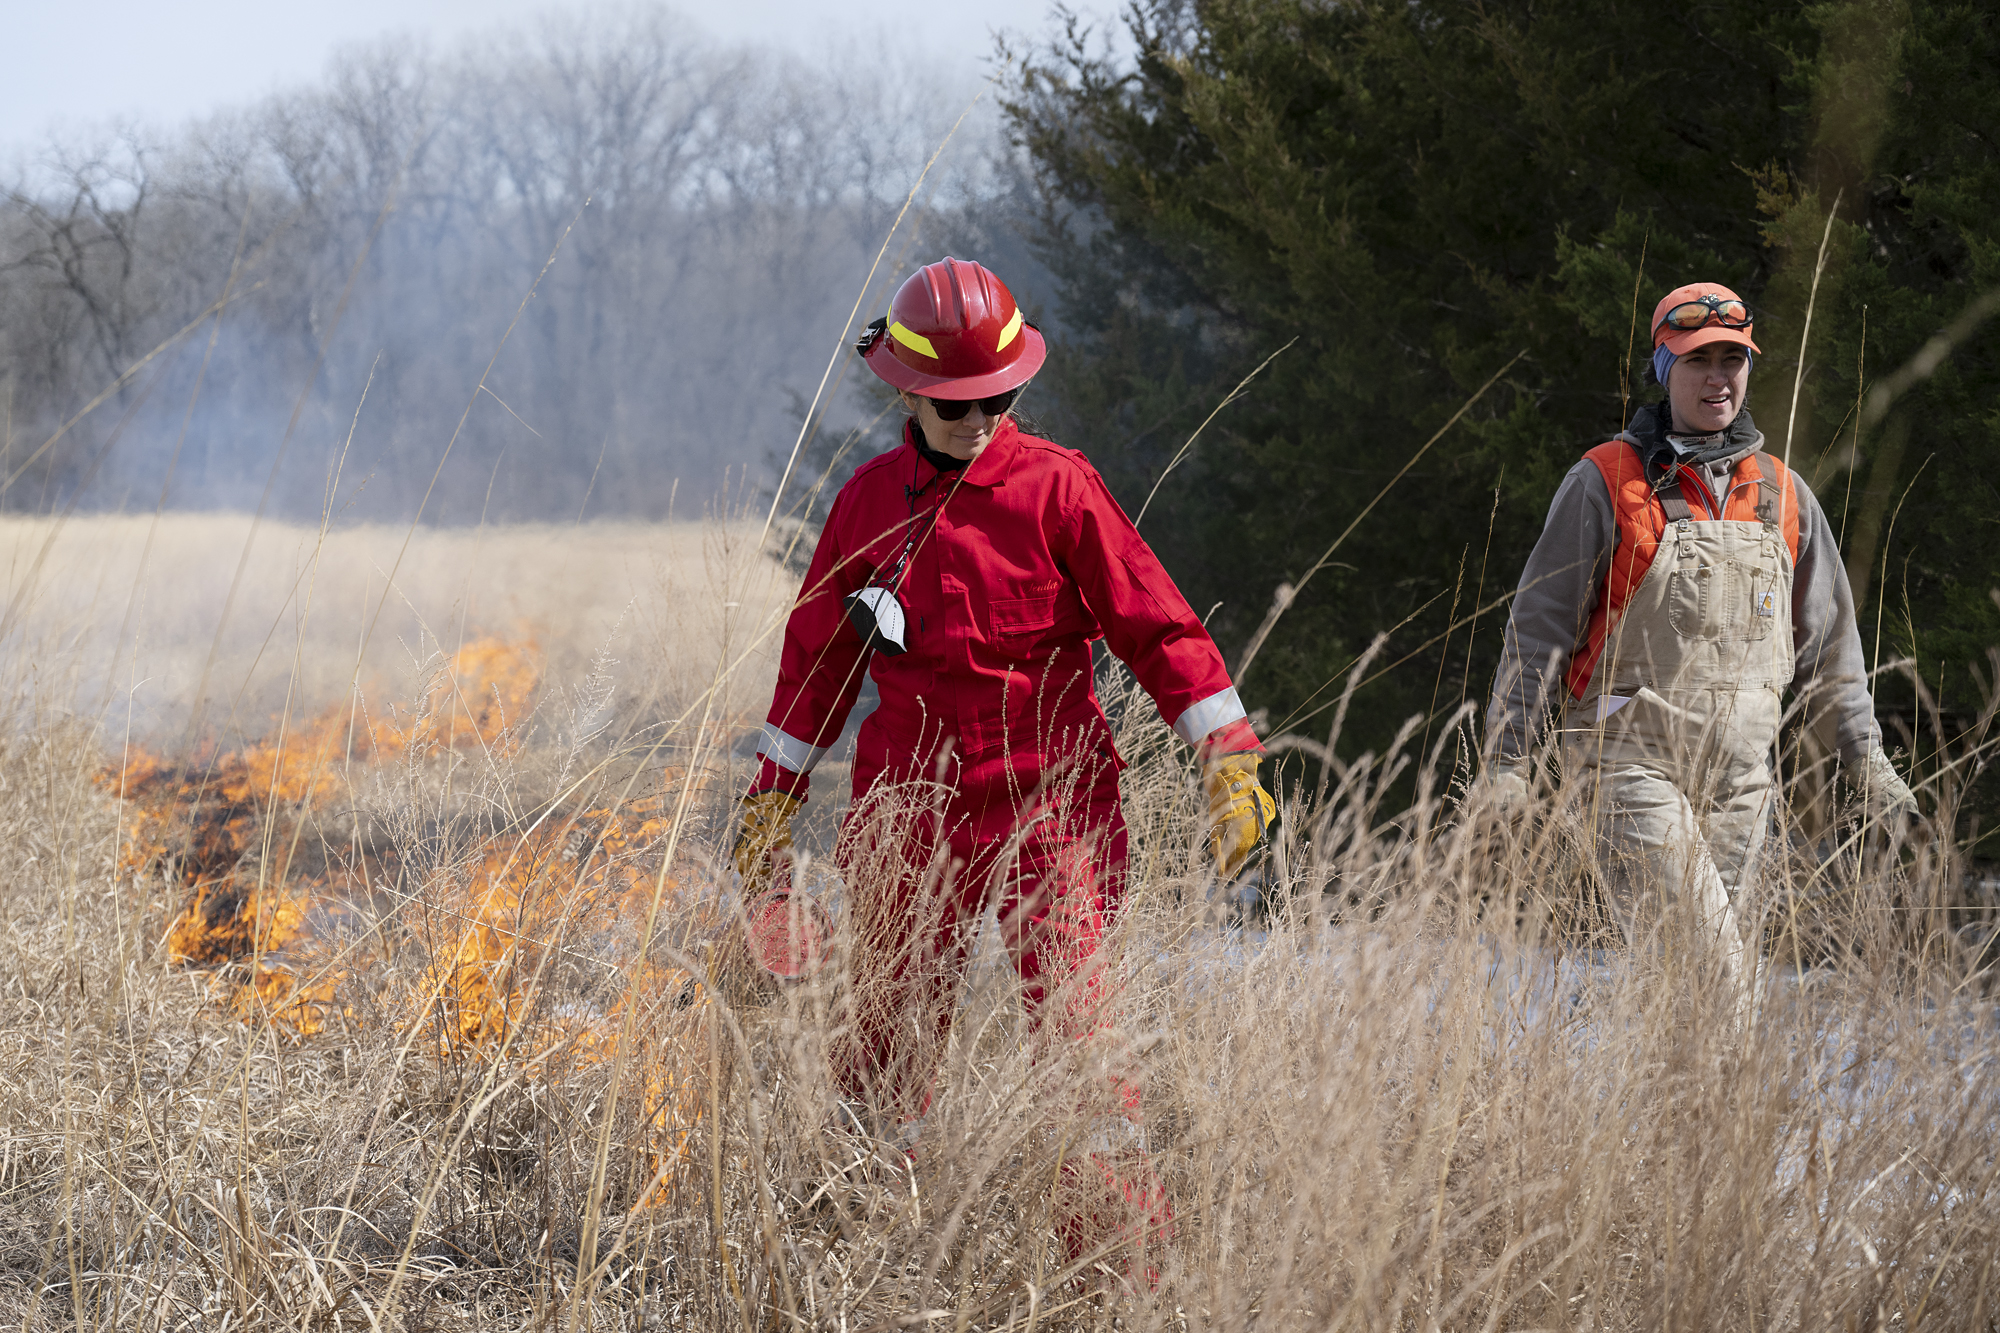 A woman in a red fire suit and red hard hat ignites a field of brown grass while behind her the field burns